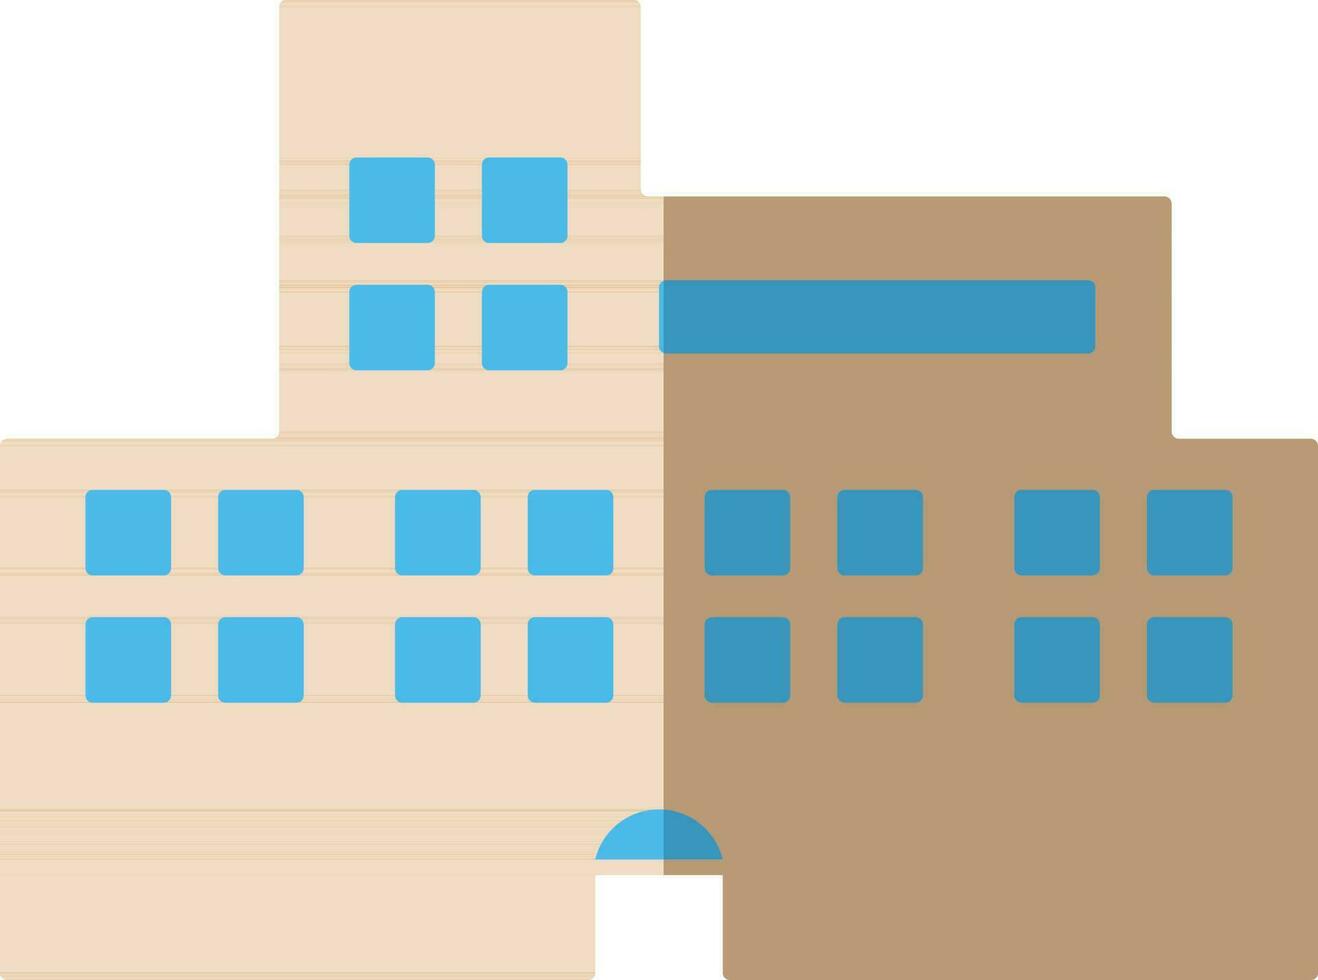 Beautiful building in flat style illustration. vector